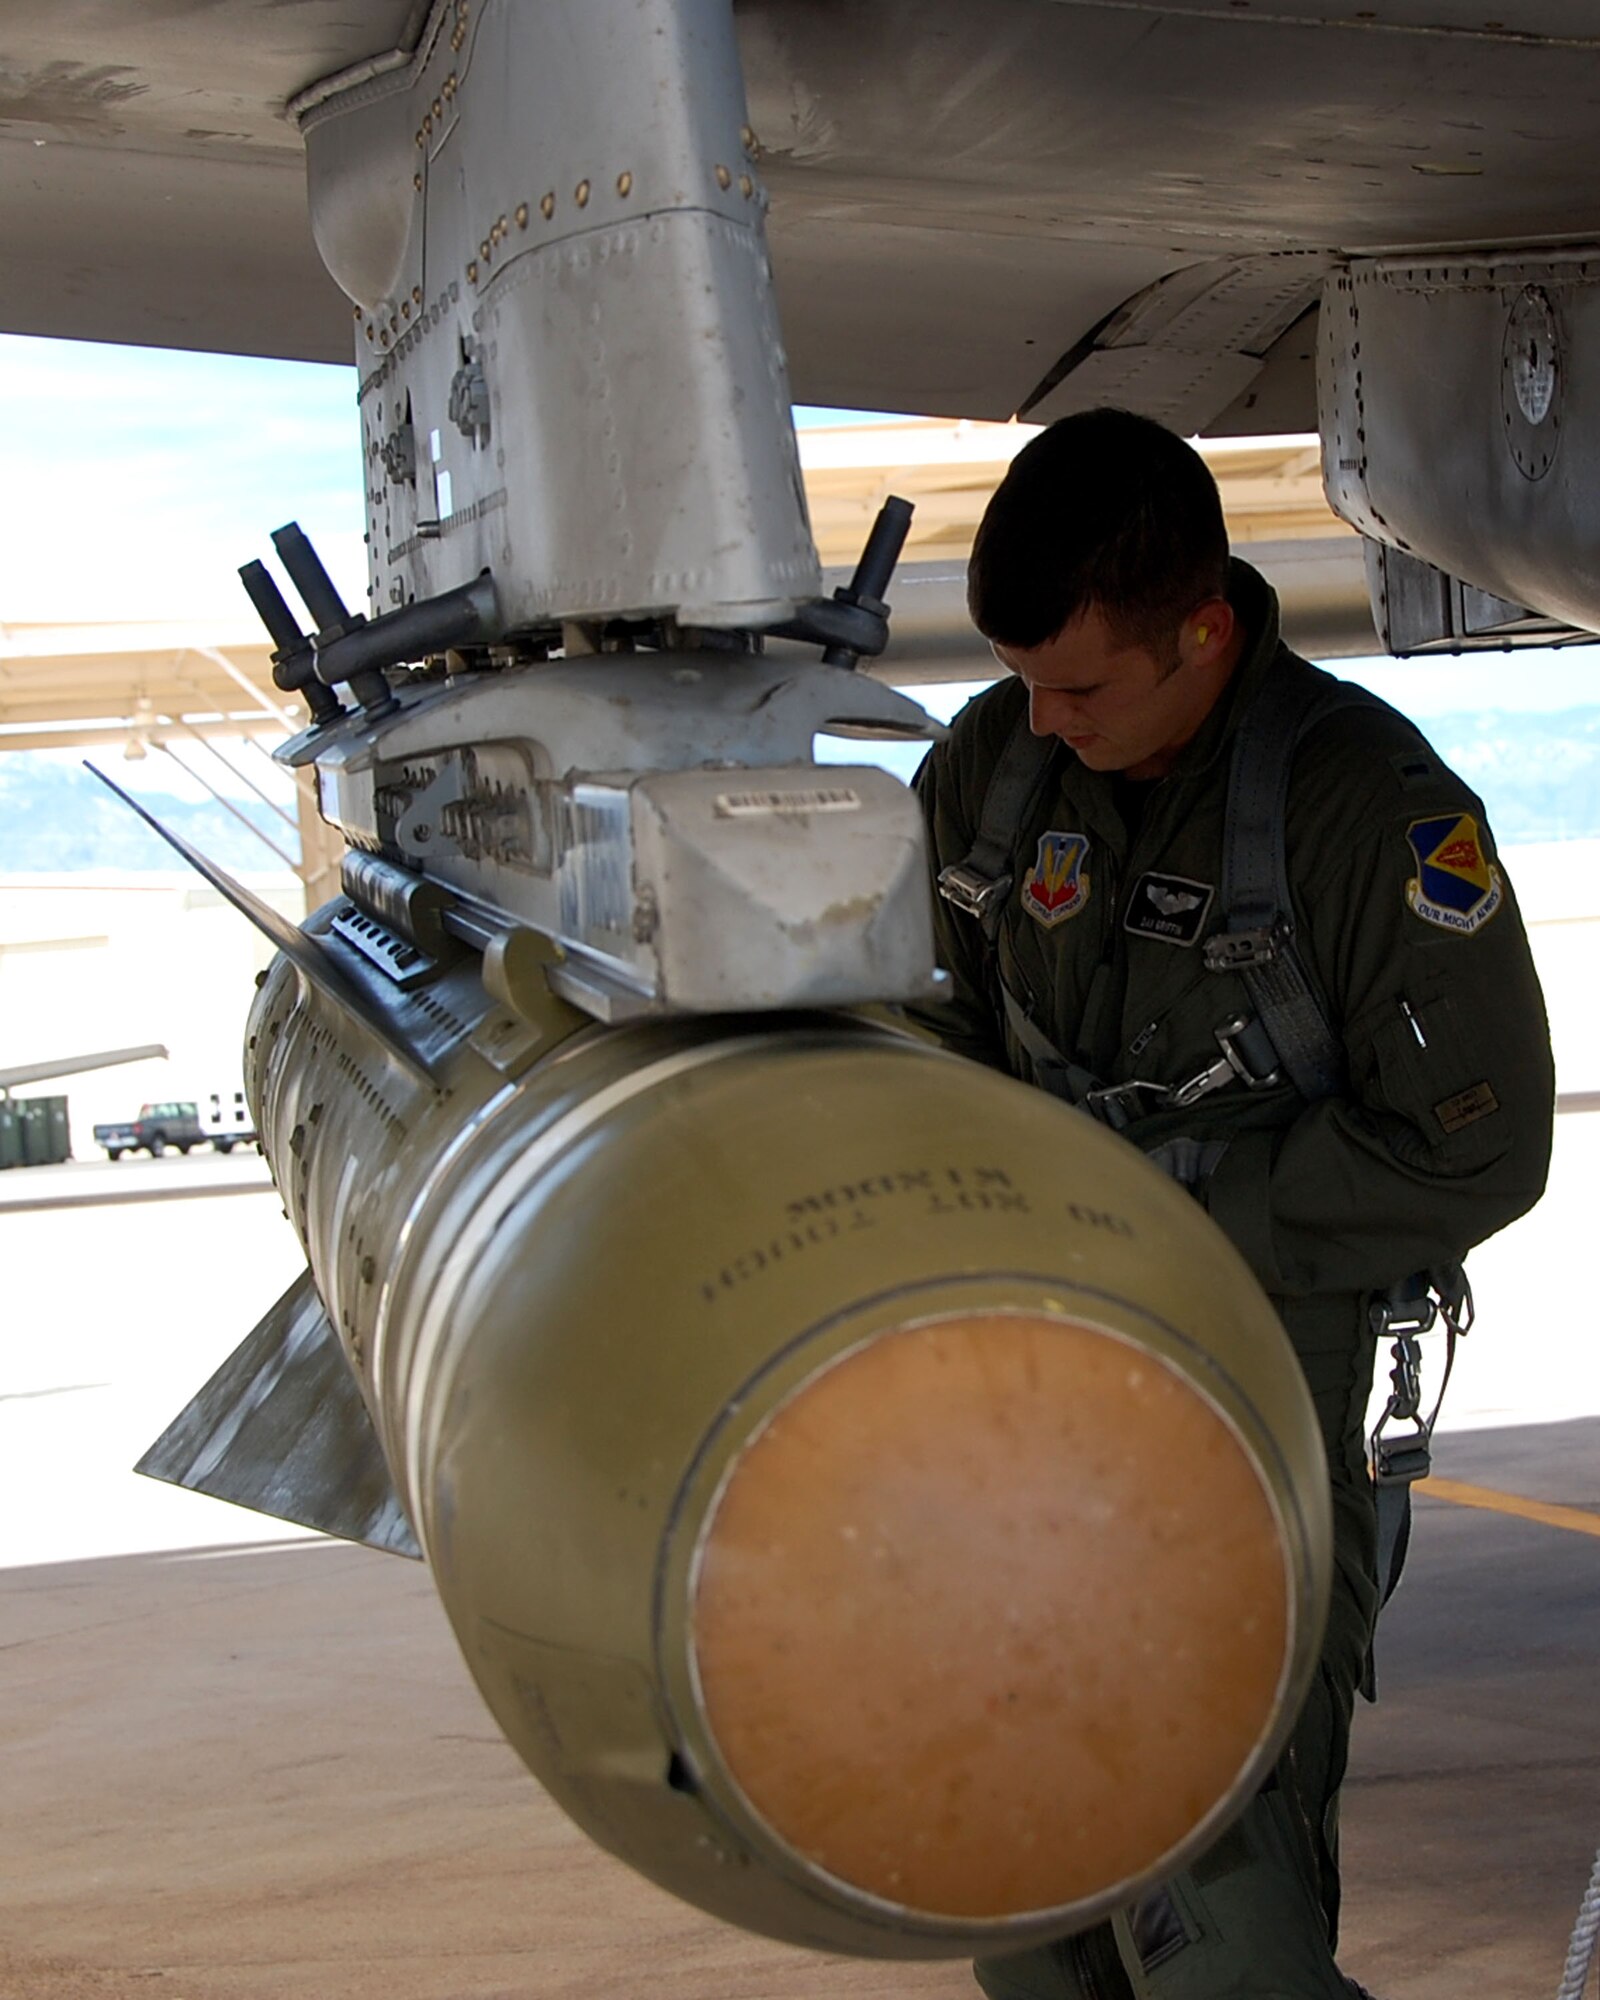 1st Lt. Dan Griffin, a pilot from the 358th Fighter Squadron, records the maverick serial number as part of his pre-flight weapons inspection here June 8. Lieutenant Griffin is a student in the A-10C Pilot Initial Qualification course and upon completion of this course he will be a fully qualified A-10C pilot. (U.S. Air Force photo/Capt. Stacie N. Shafran)